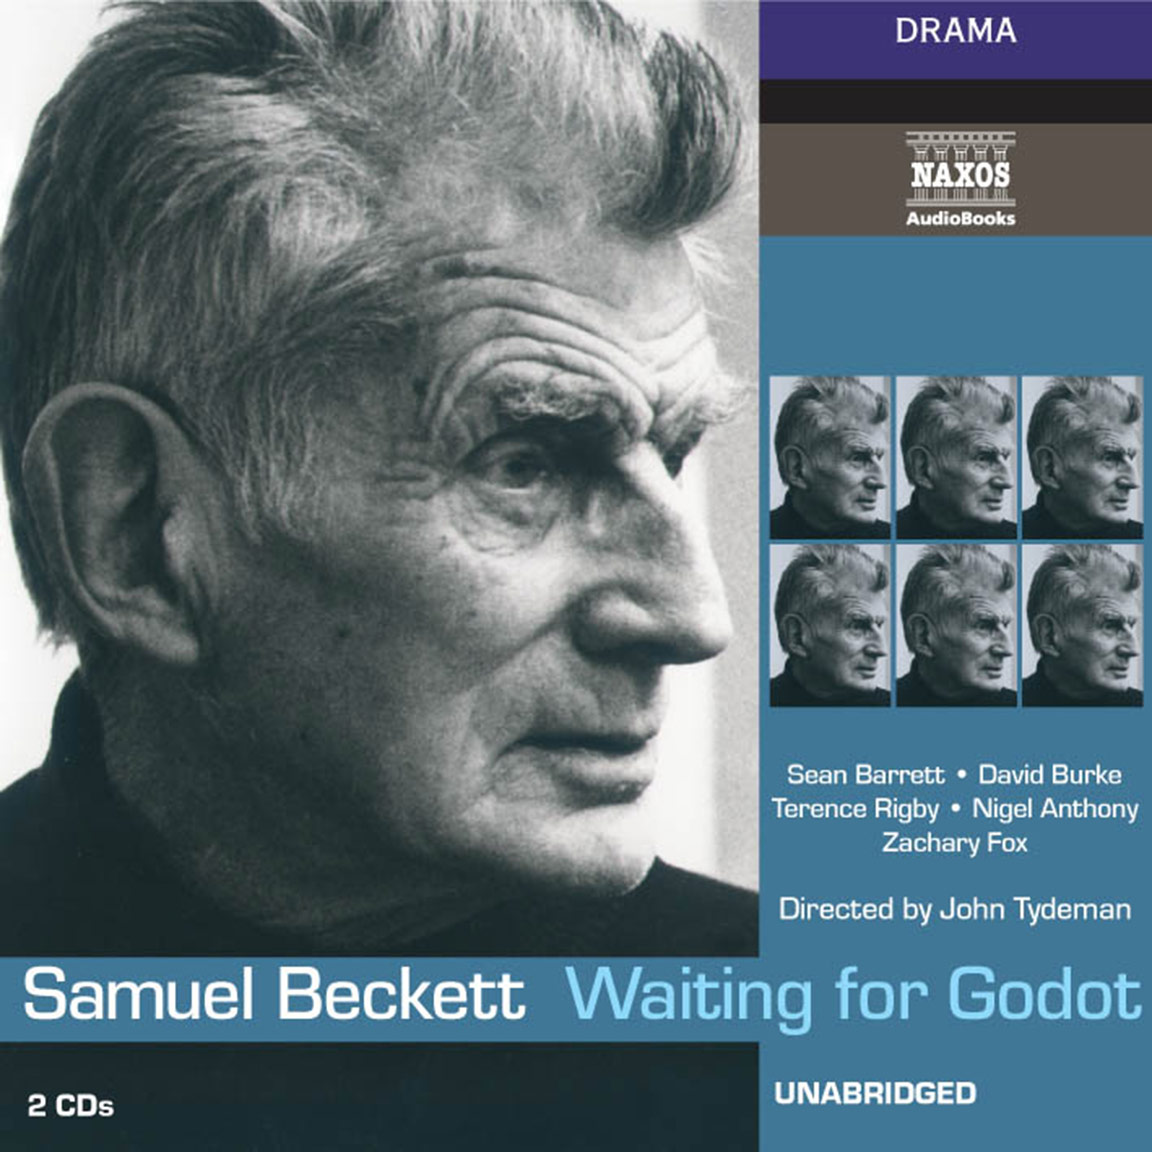 significance of the title waiting for godot